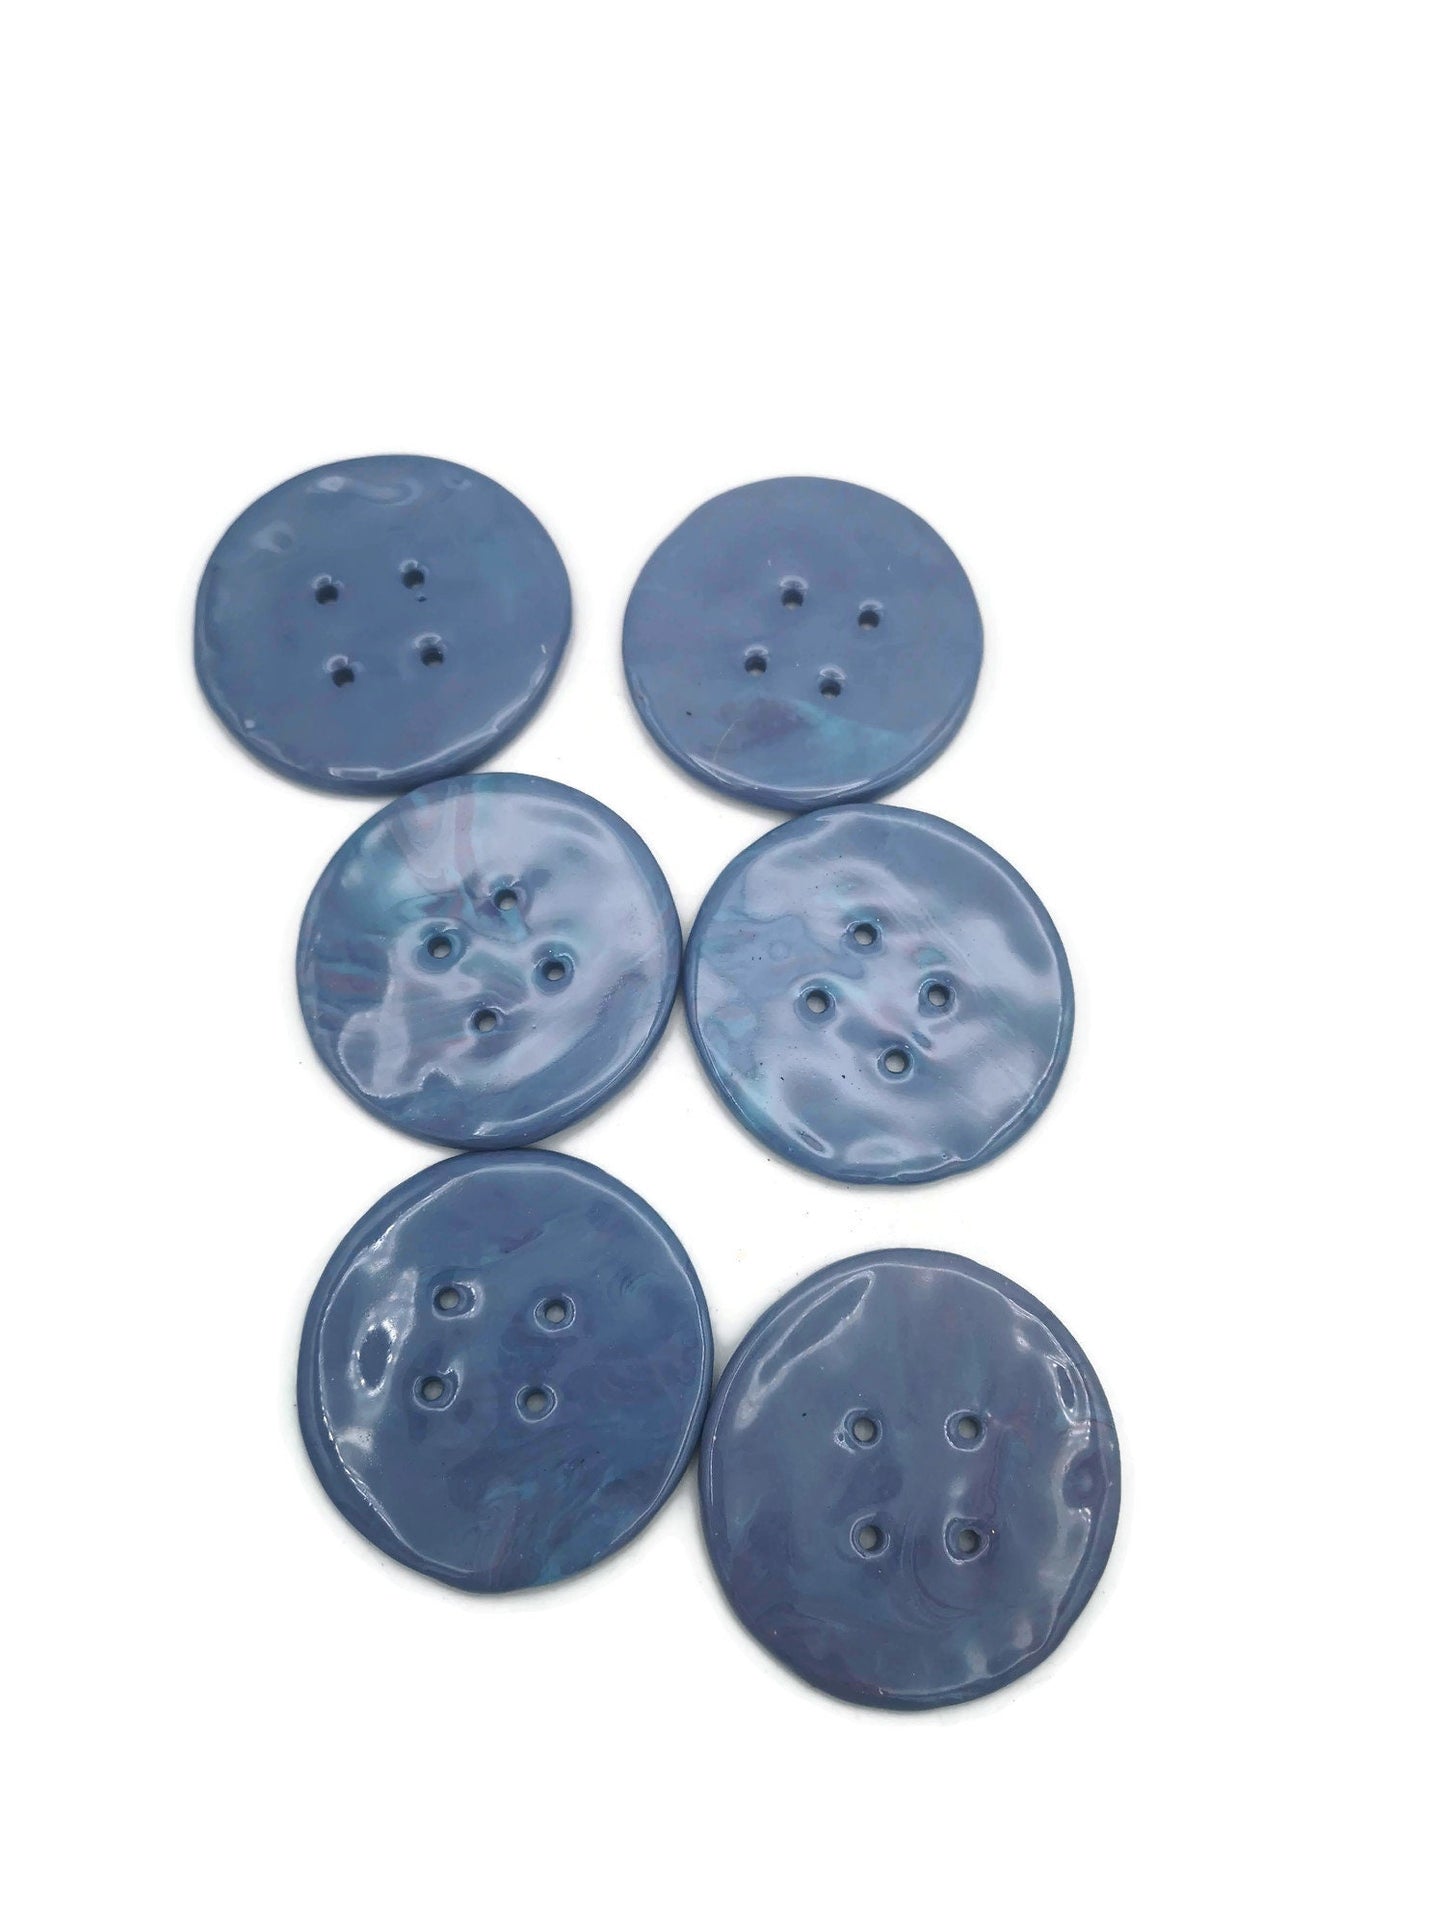 6Pc Extra Large Sewing Buttons 60mm, Mable Blue And Purple 4 Hole Handmade Ceramic Round Button, Artisan Novelty Coat Button Lot For Clothes - Ceramica Ana Rafael